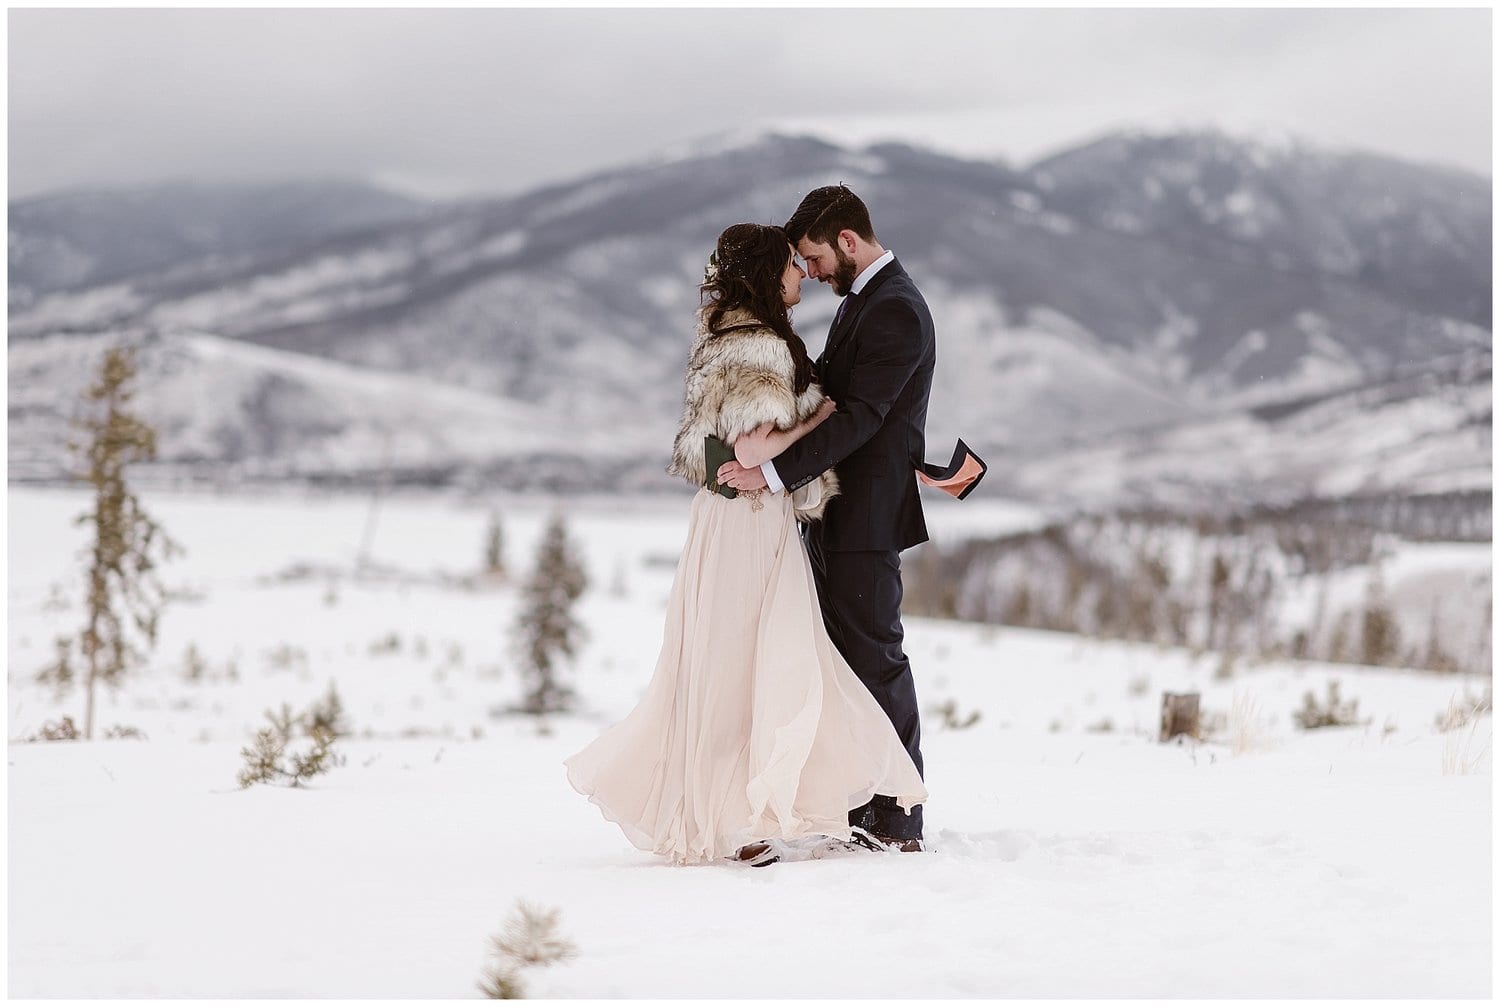 Bride and groom embrace during intimate elopement ceremony at Sapphire Point, Colorado. There is snow covering the ground and mountains in the background. 